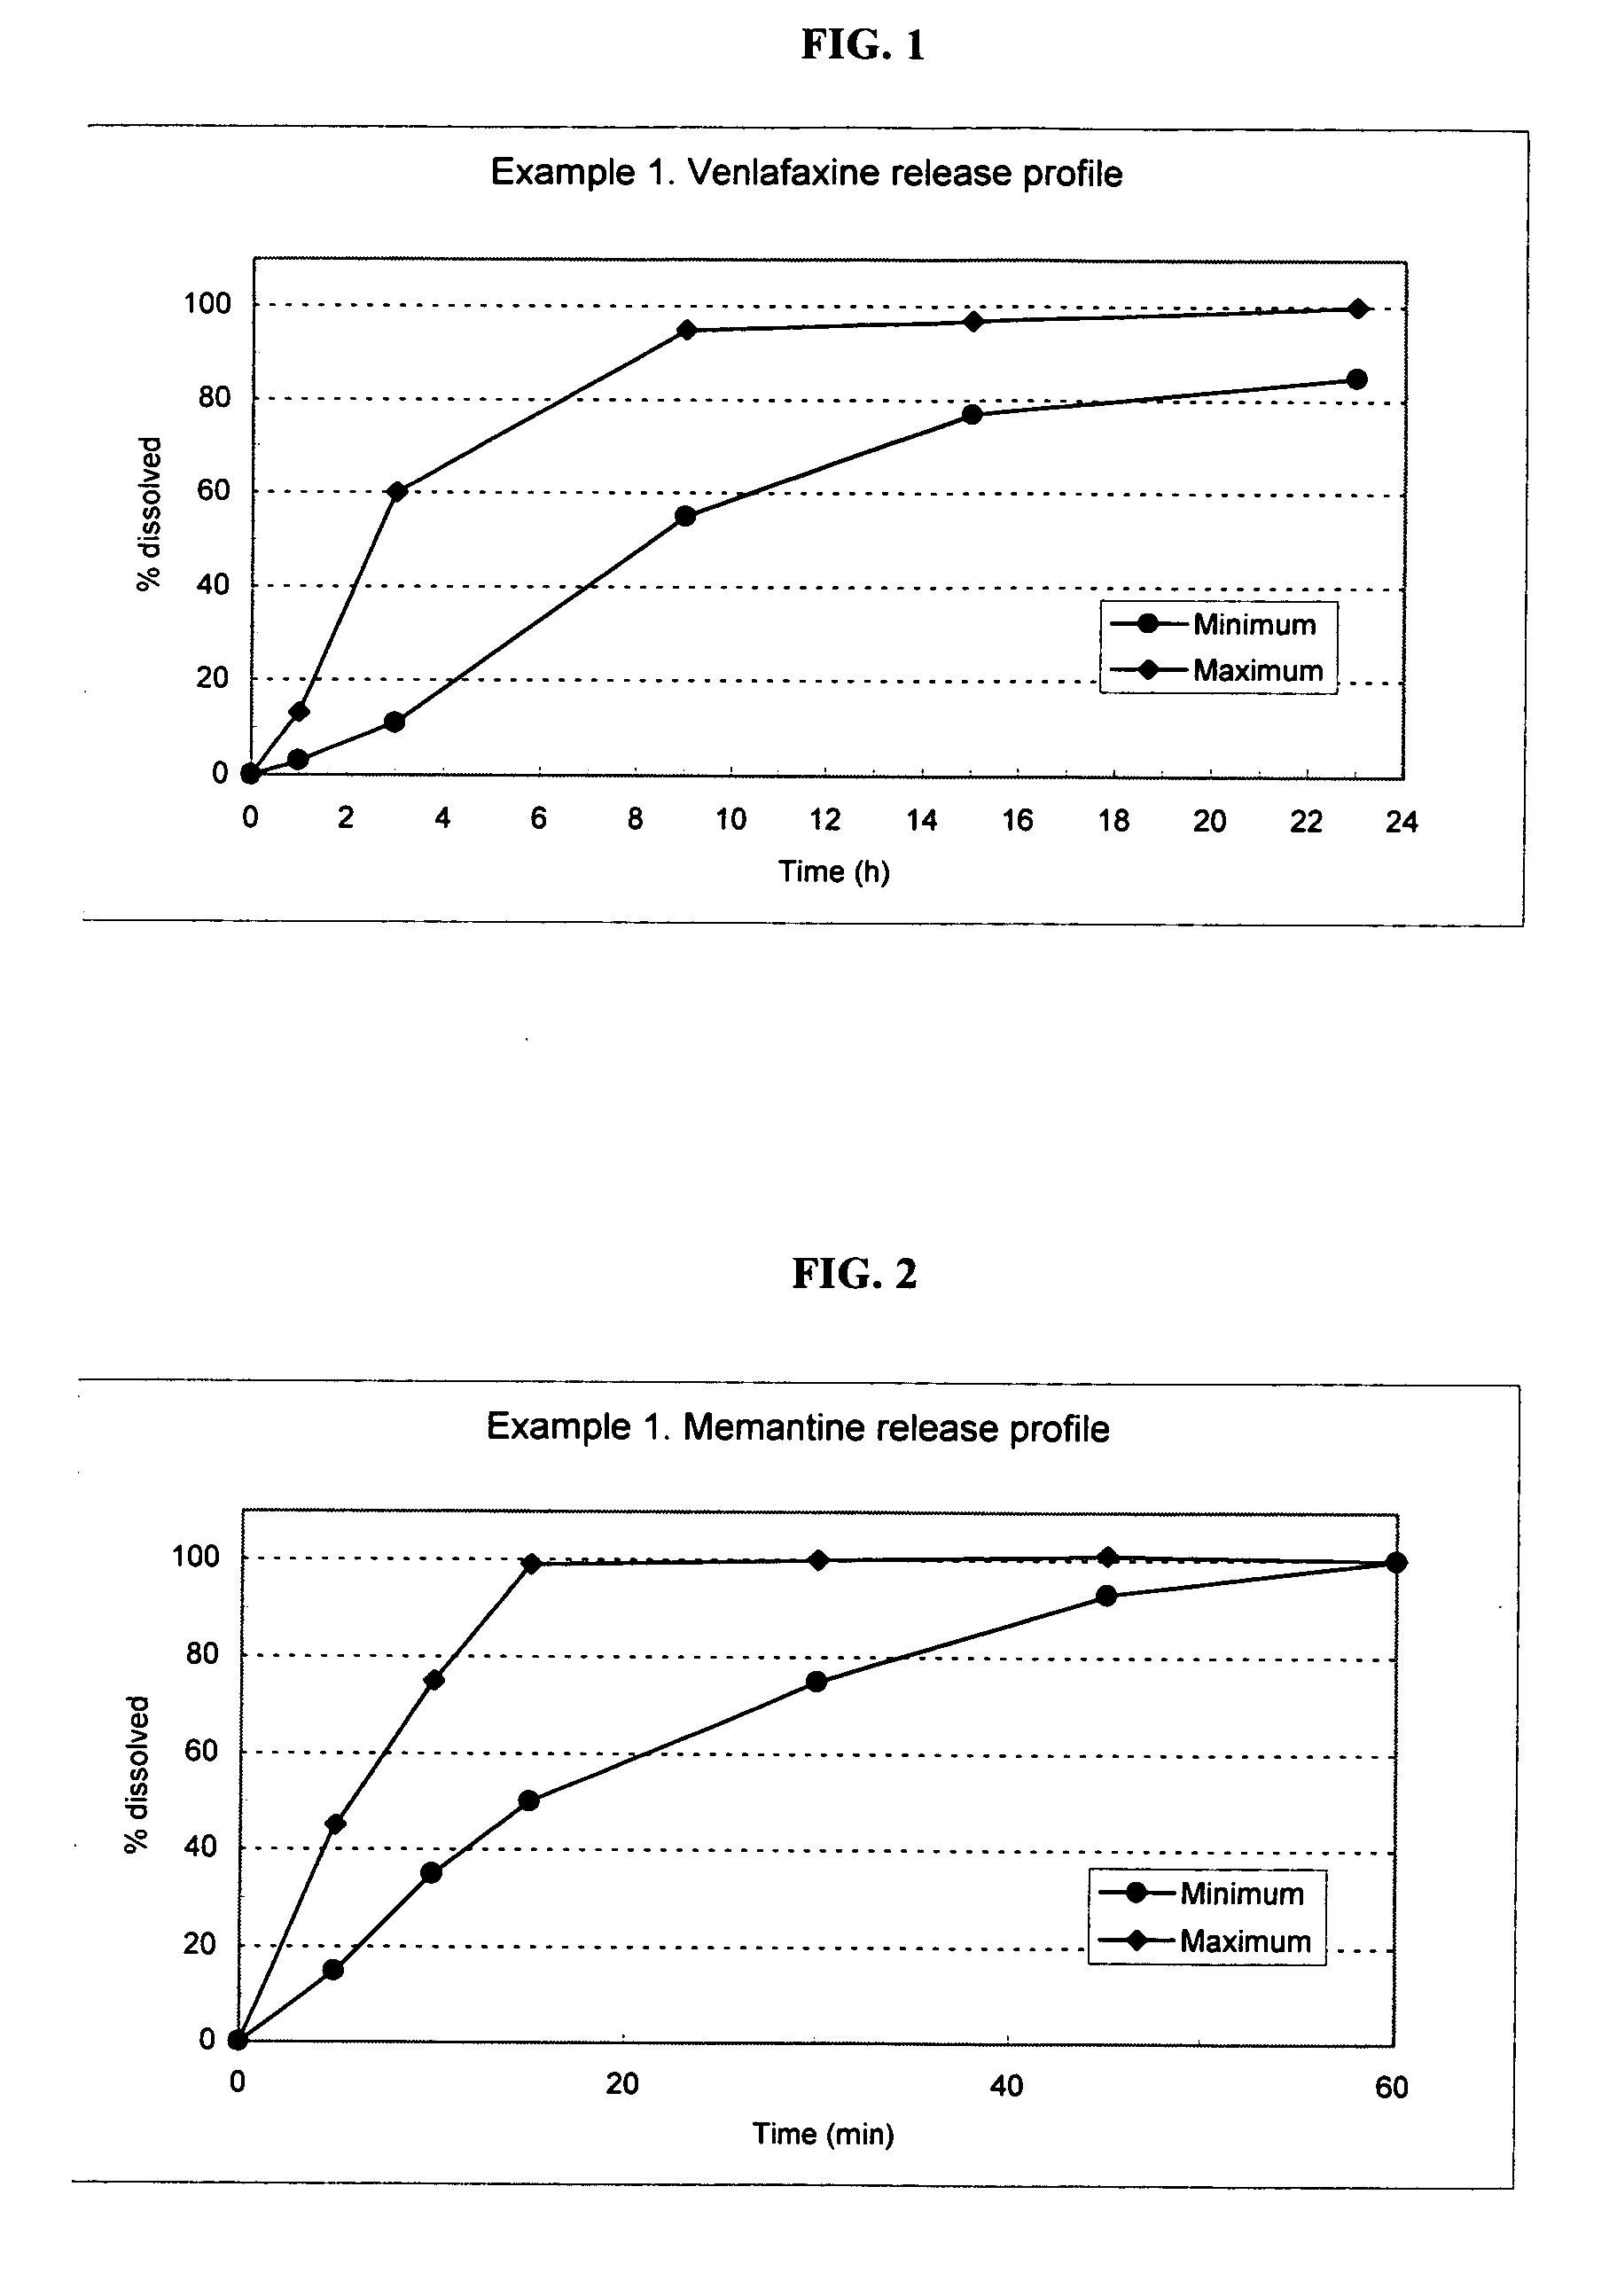 Delivery device containing venlafaxine and memantine and methods of use thereof